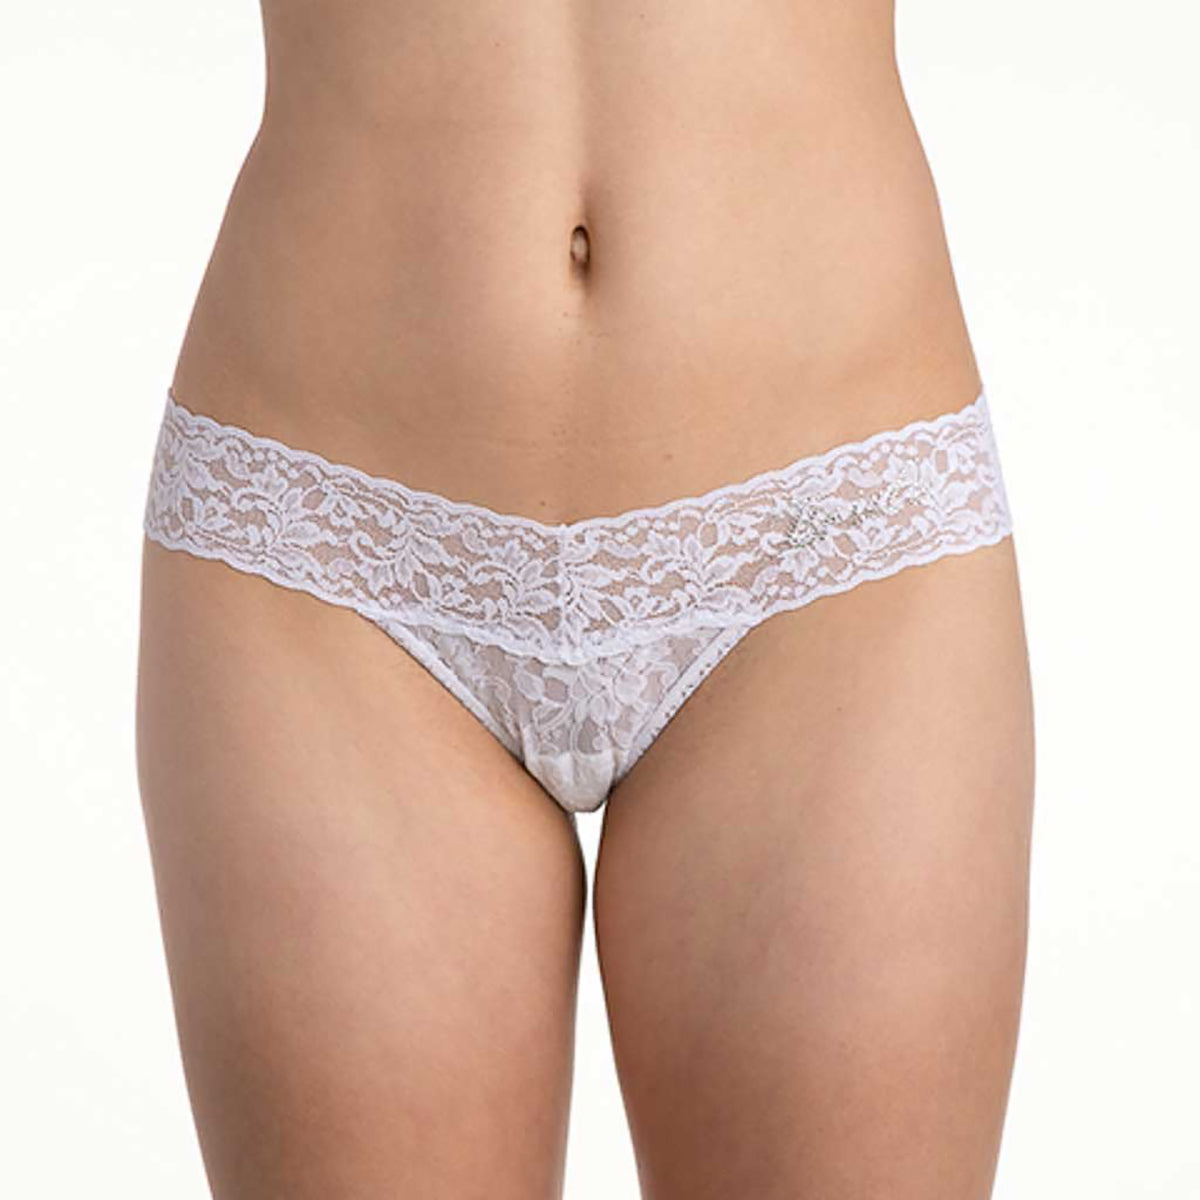 Hanky Panky "Bride" Crystals Low Rise Thong in White 491041